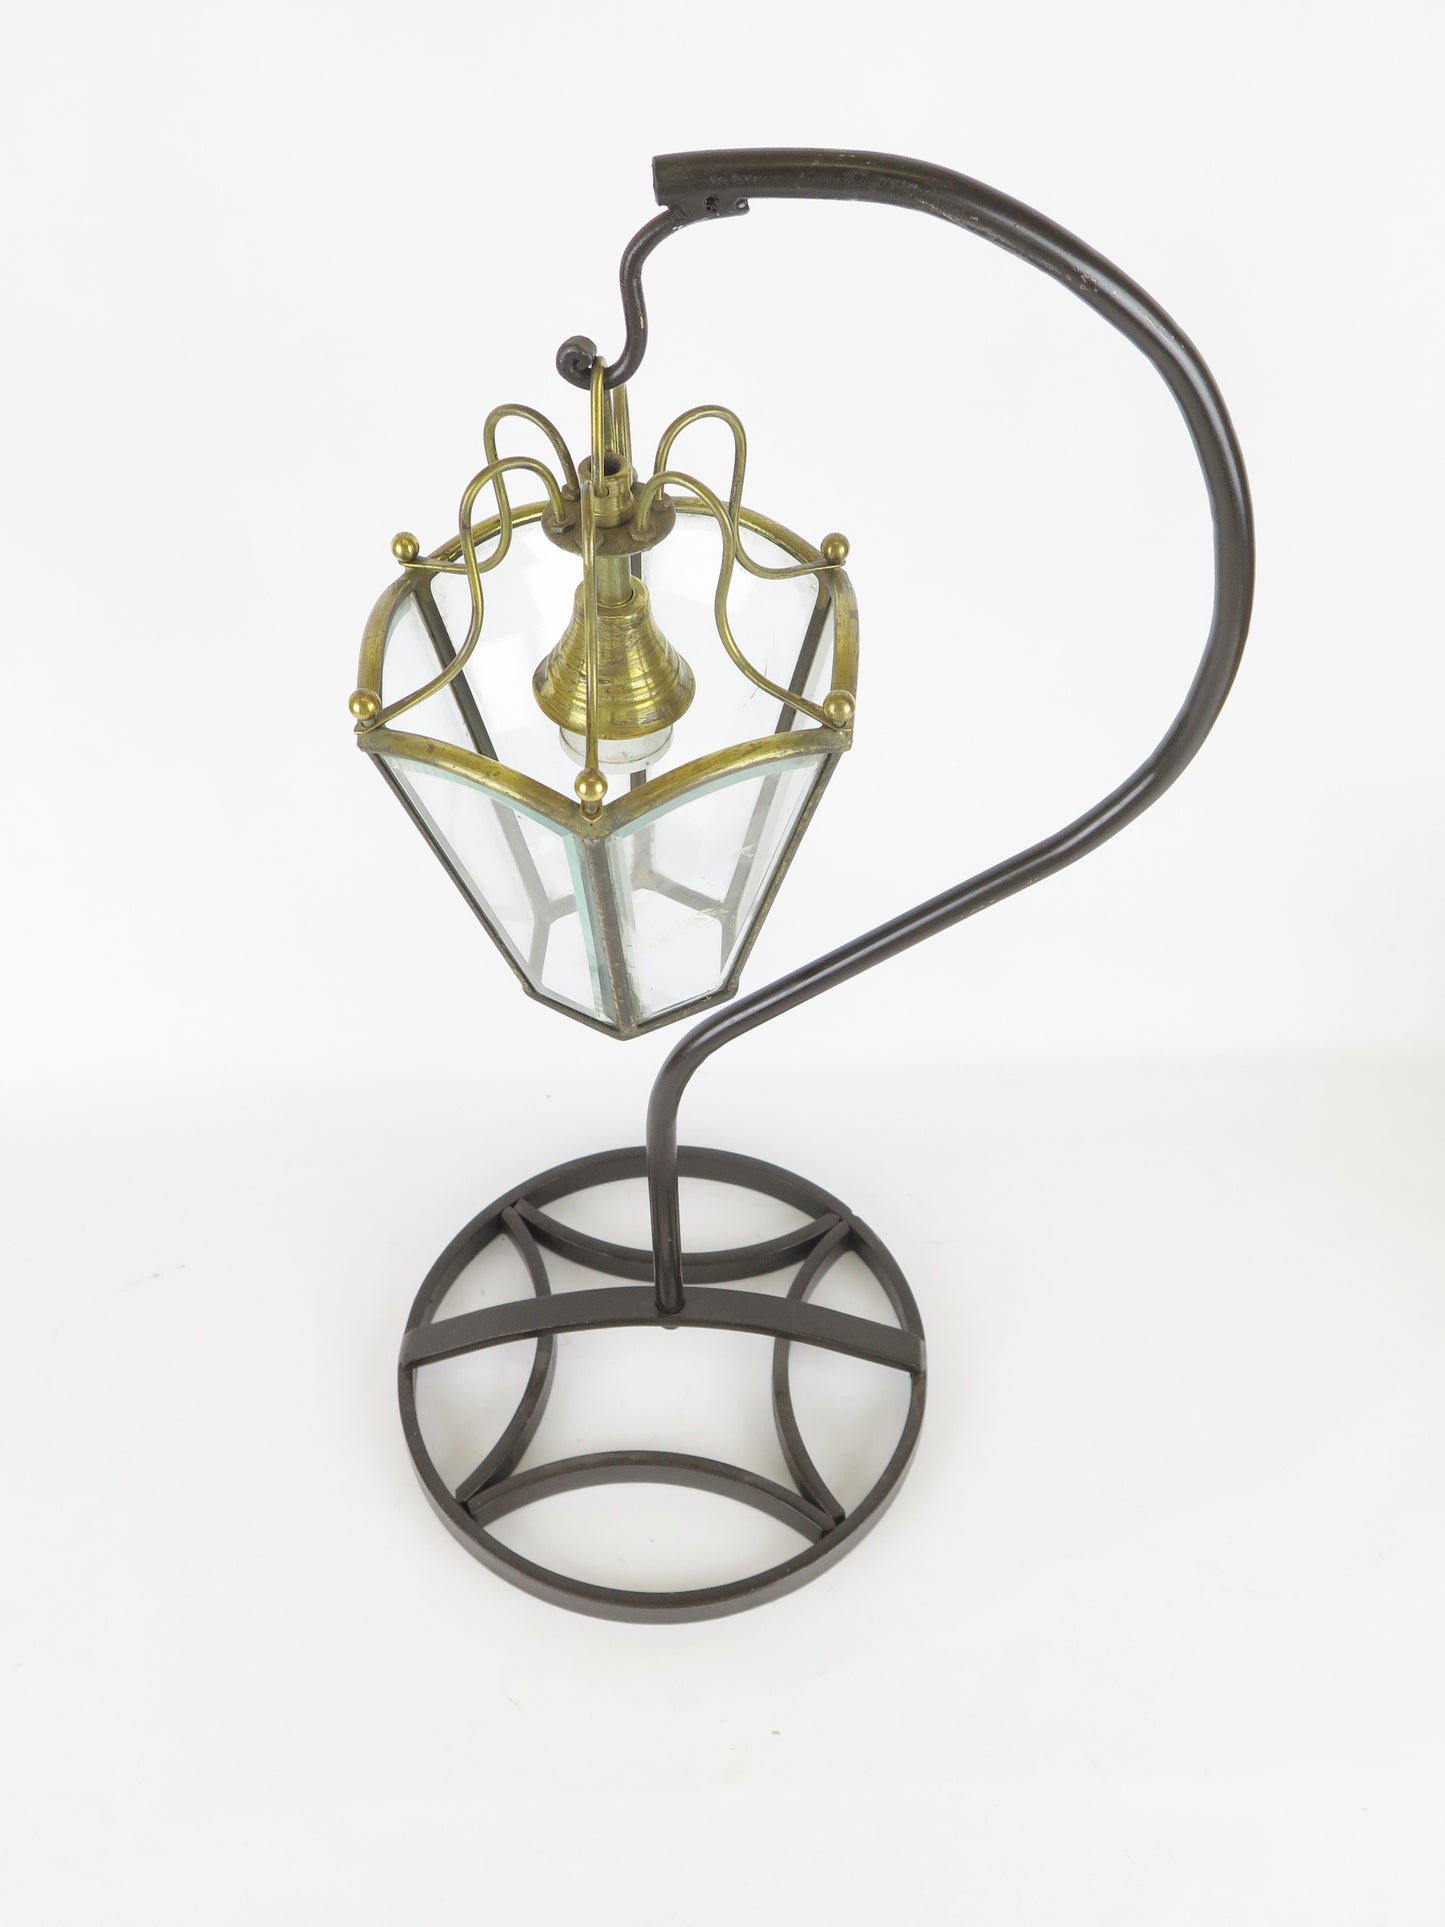 TABLE LAMP IN METAL AND WROUGHT IRON VINTAGE CIRCULAR DESIGN ARTE CH15